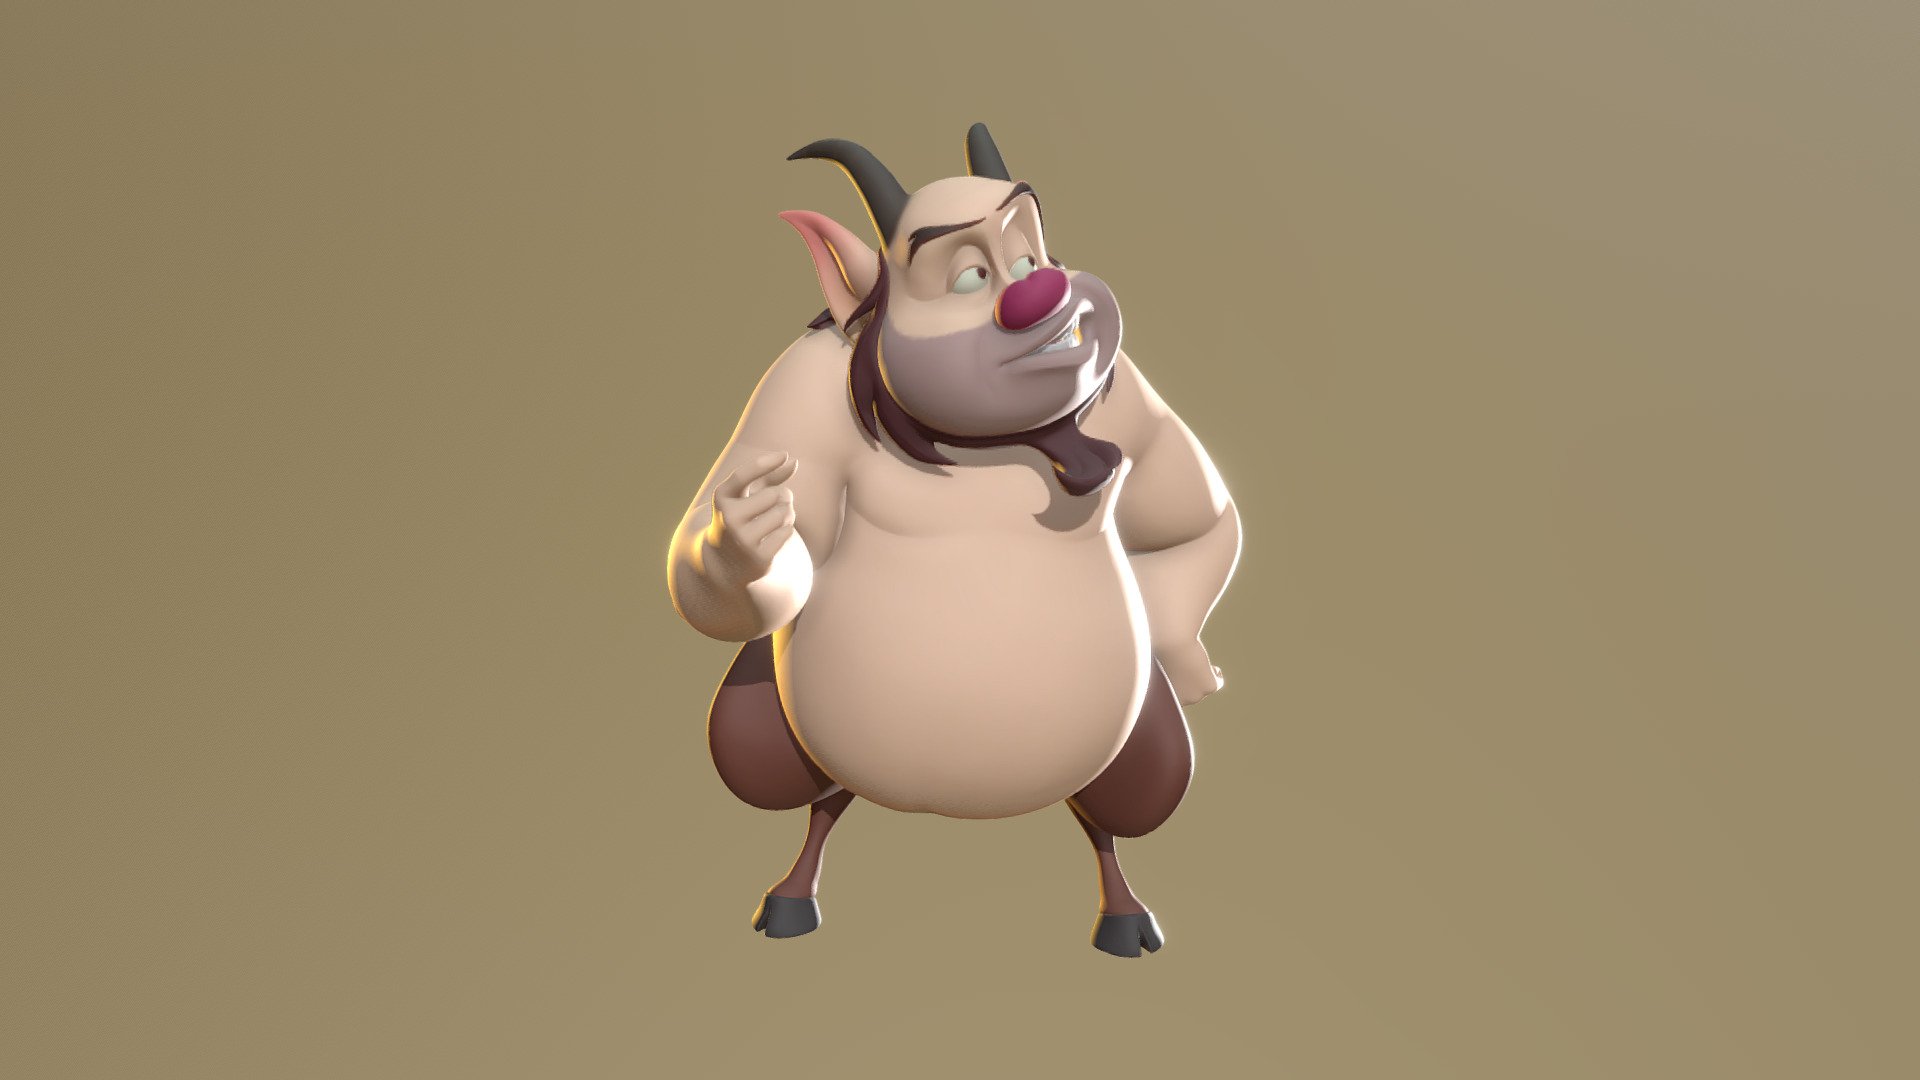 Sculpt of Phil the satyr from Disney's Hercules movie for printing purposes.
No UVs or textures, color where done with vertex paint.
Added a FBX file with a base for better stand 3d model